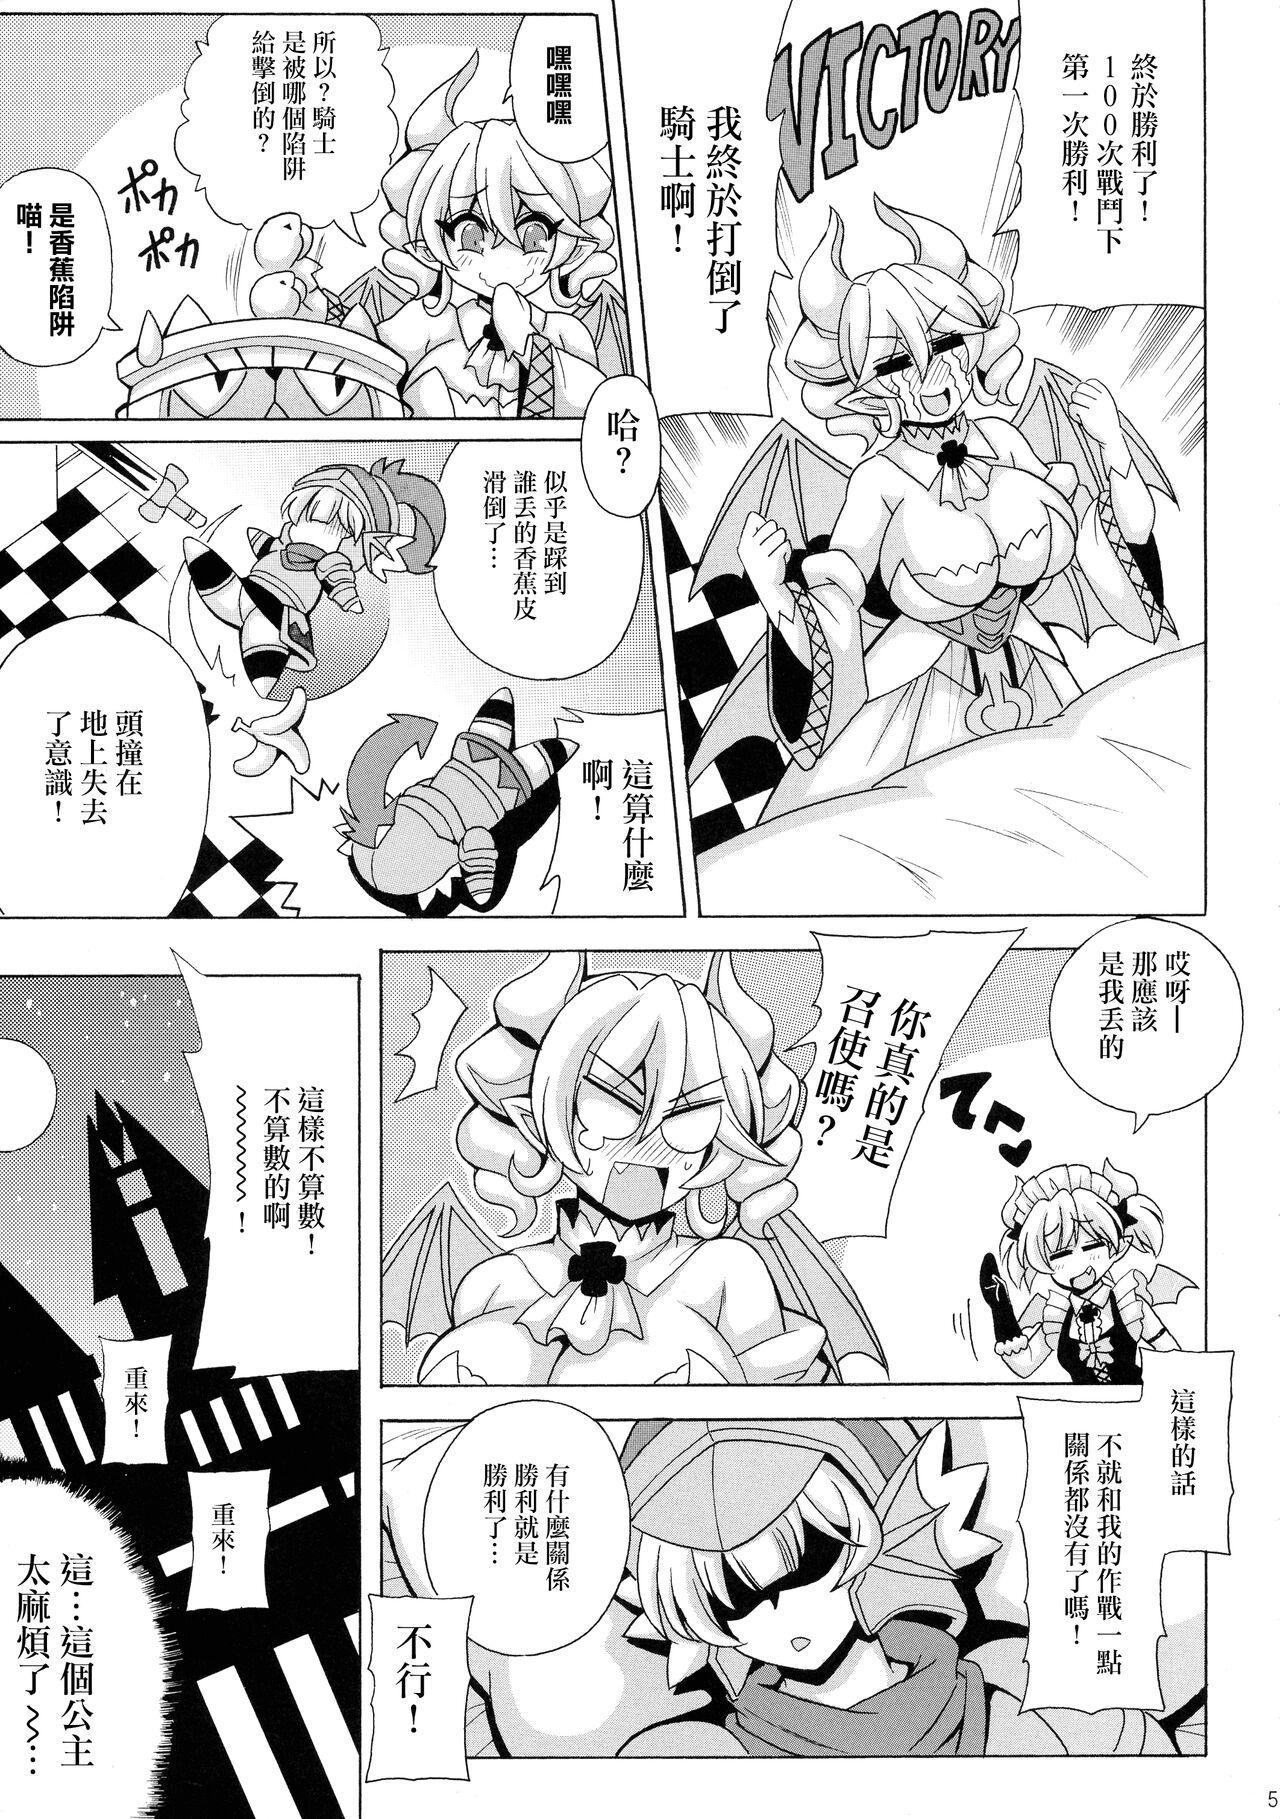 Natural LABRYNTH MILK - Yu gi oh Two - Page 7